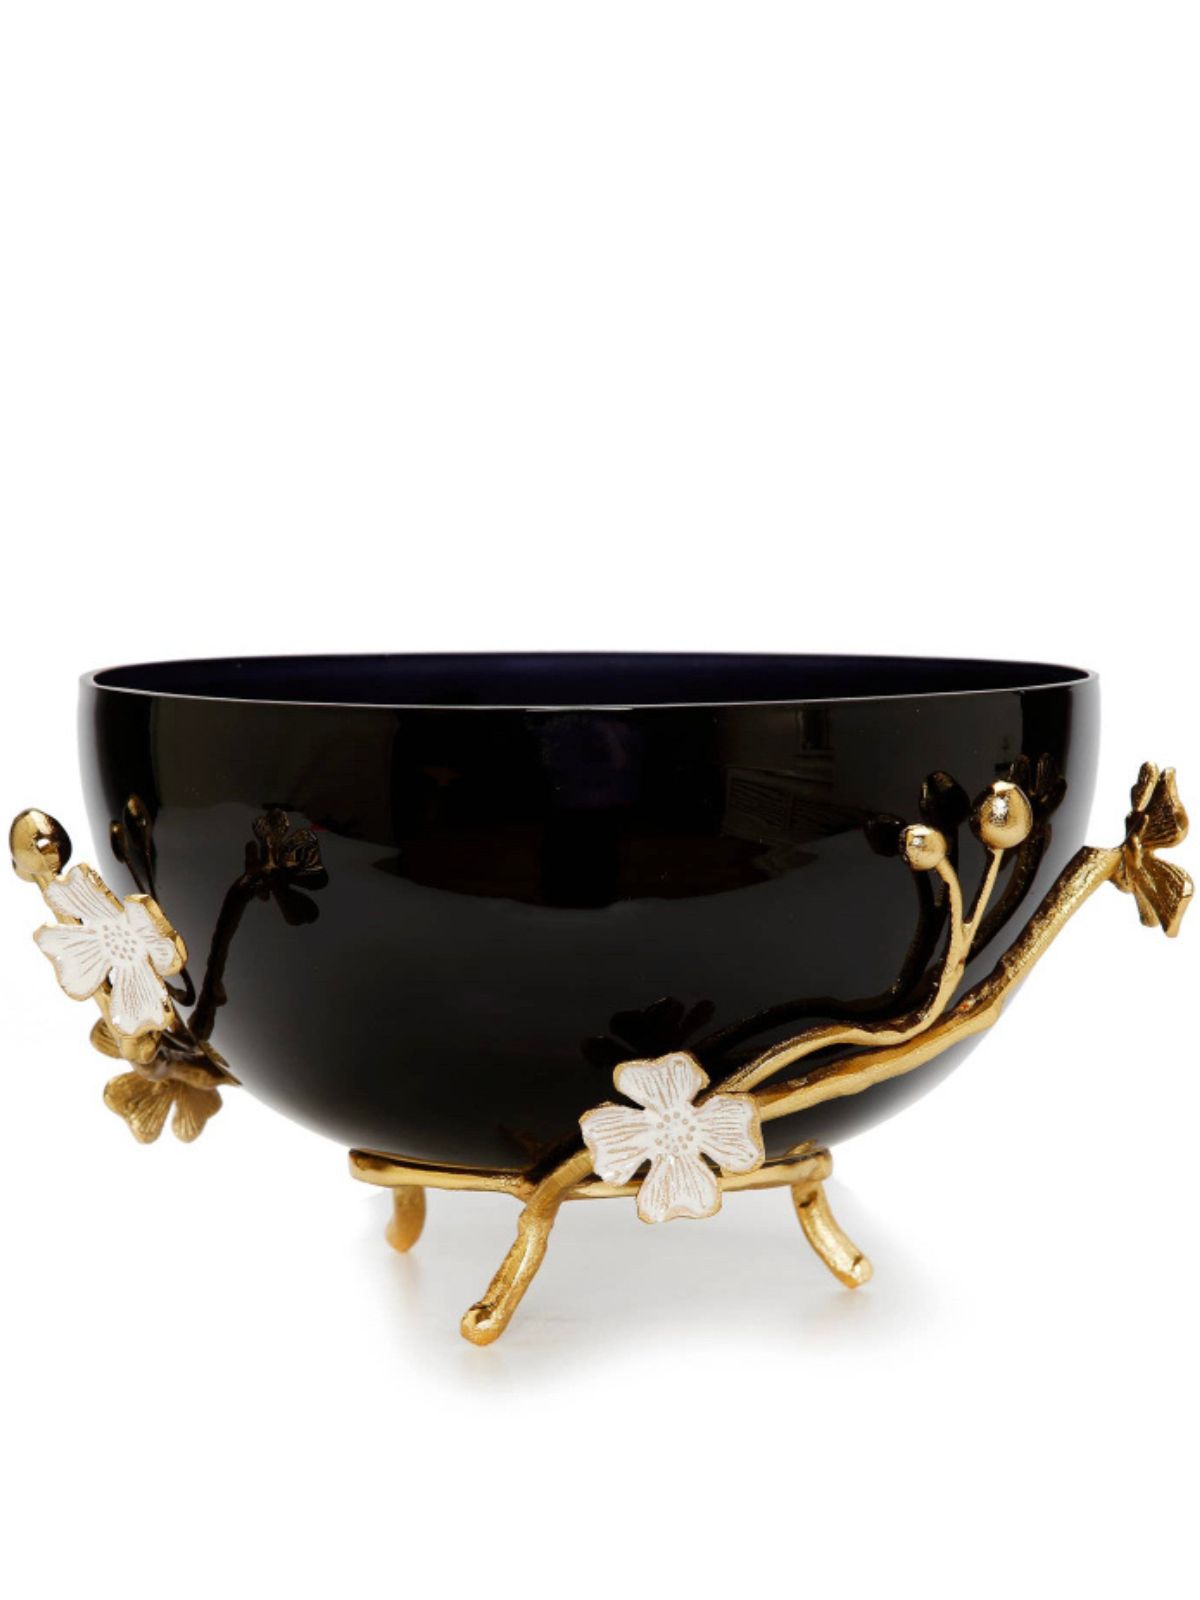 Black Glass Bowl with Cherry Blossom Flower Detail, 10.5D.